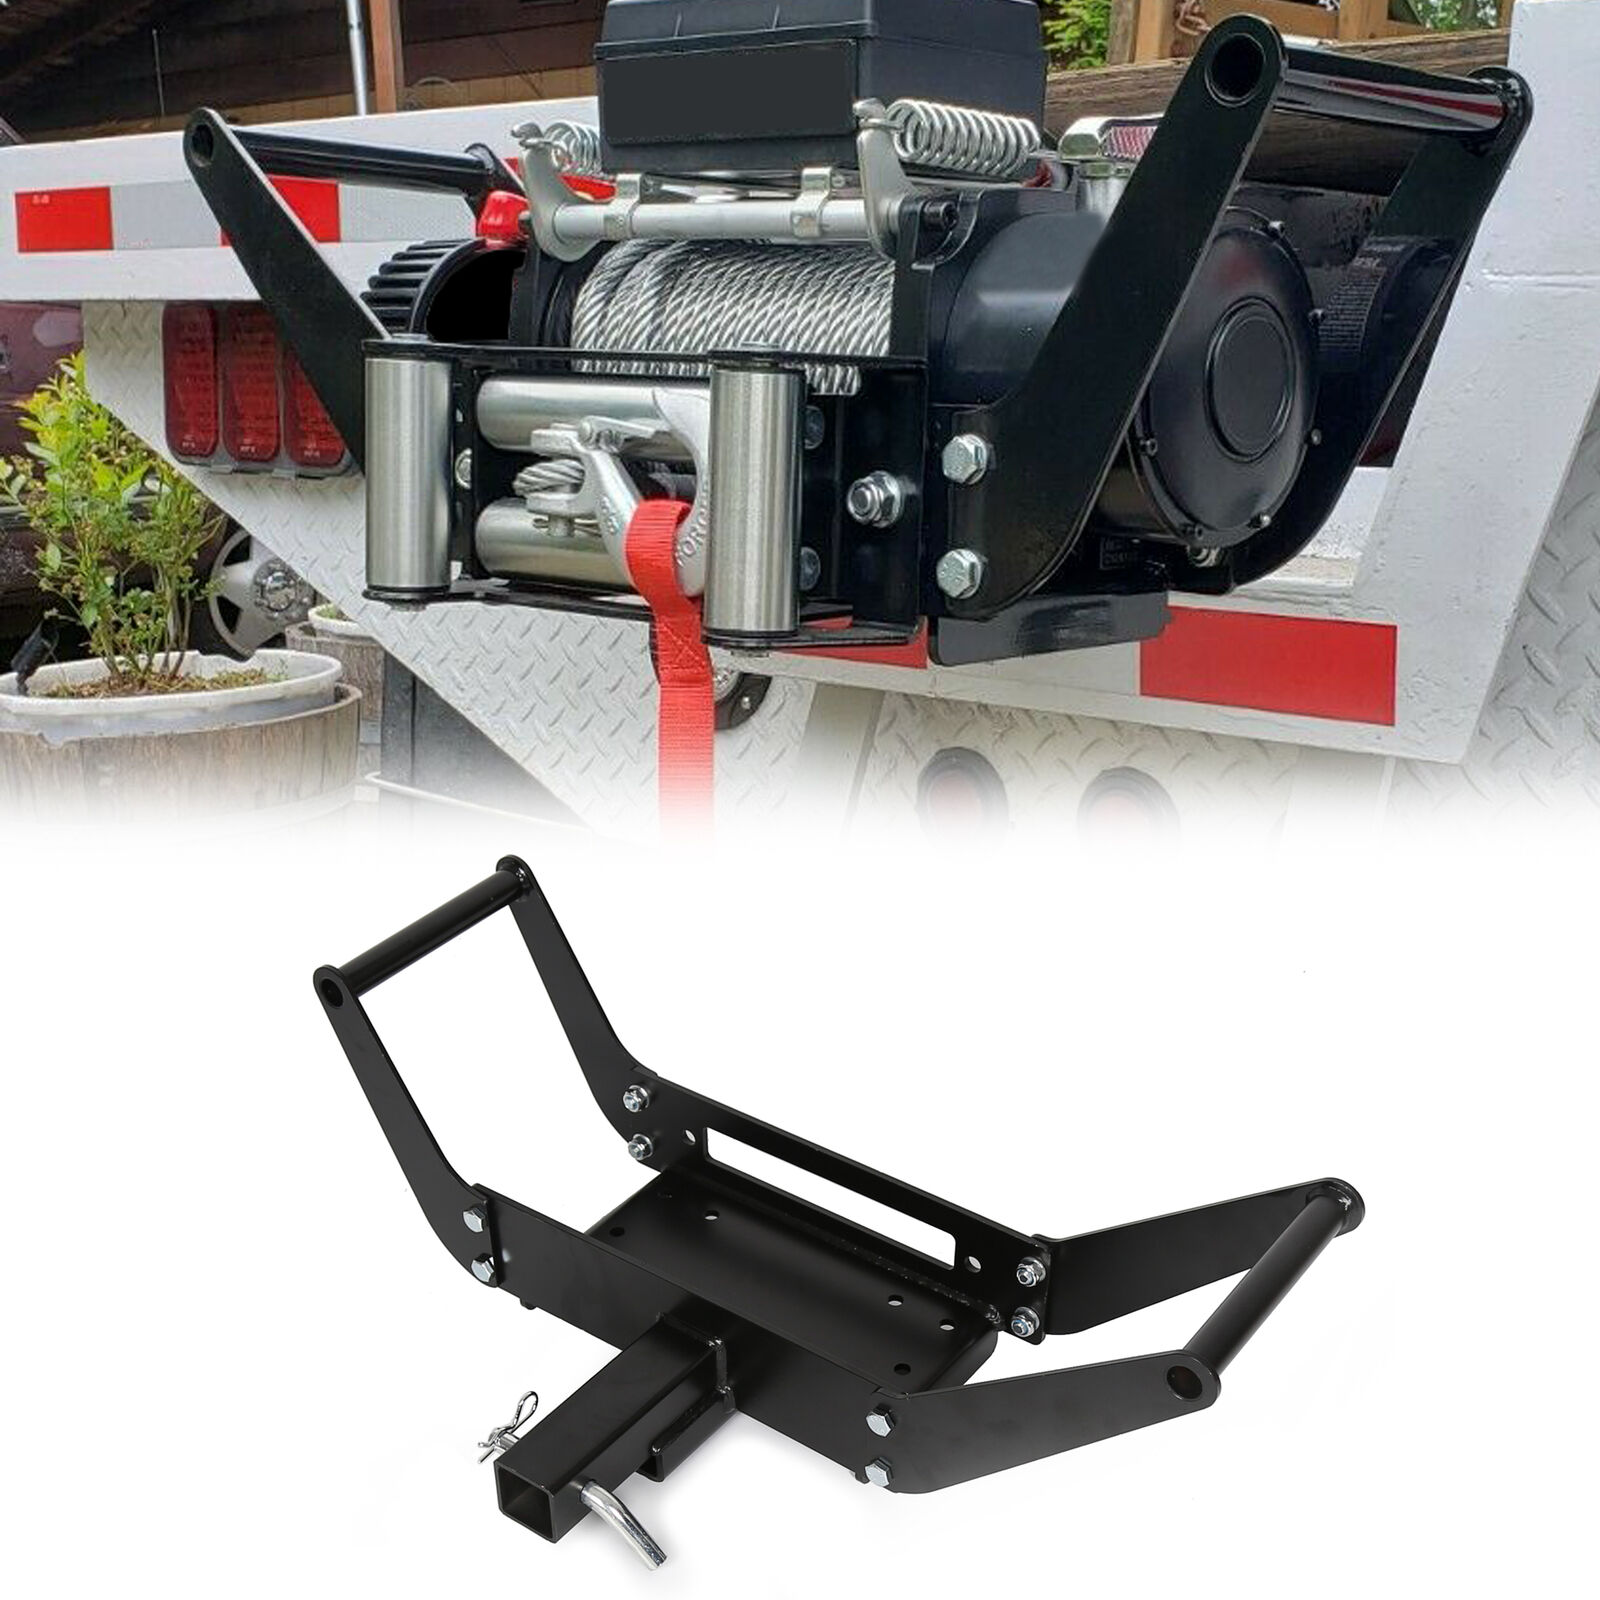 Universal 2 Trailer Hitch Winch Mounting Bracket for ATV UTV Truck BUNKER INDUST Receiver Hitch Winch Cradle Mount Plate 